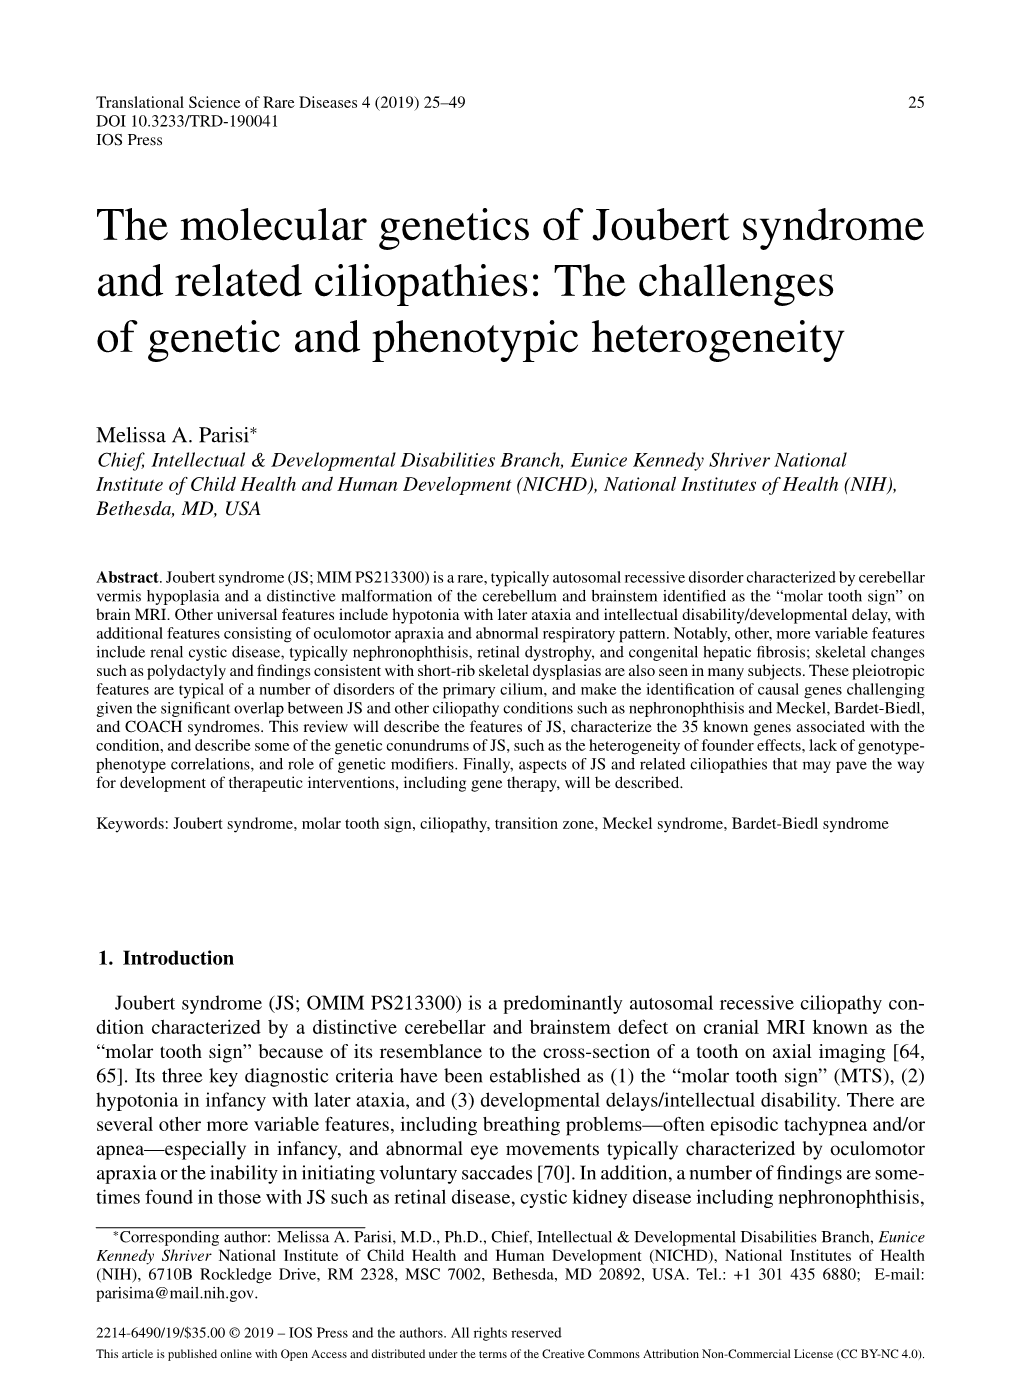 The Molecular Genetics of Joubert Syndrome and Related Ciliopathies: the Challenges of Genetic and Phenotypic Heterogeneity